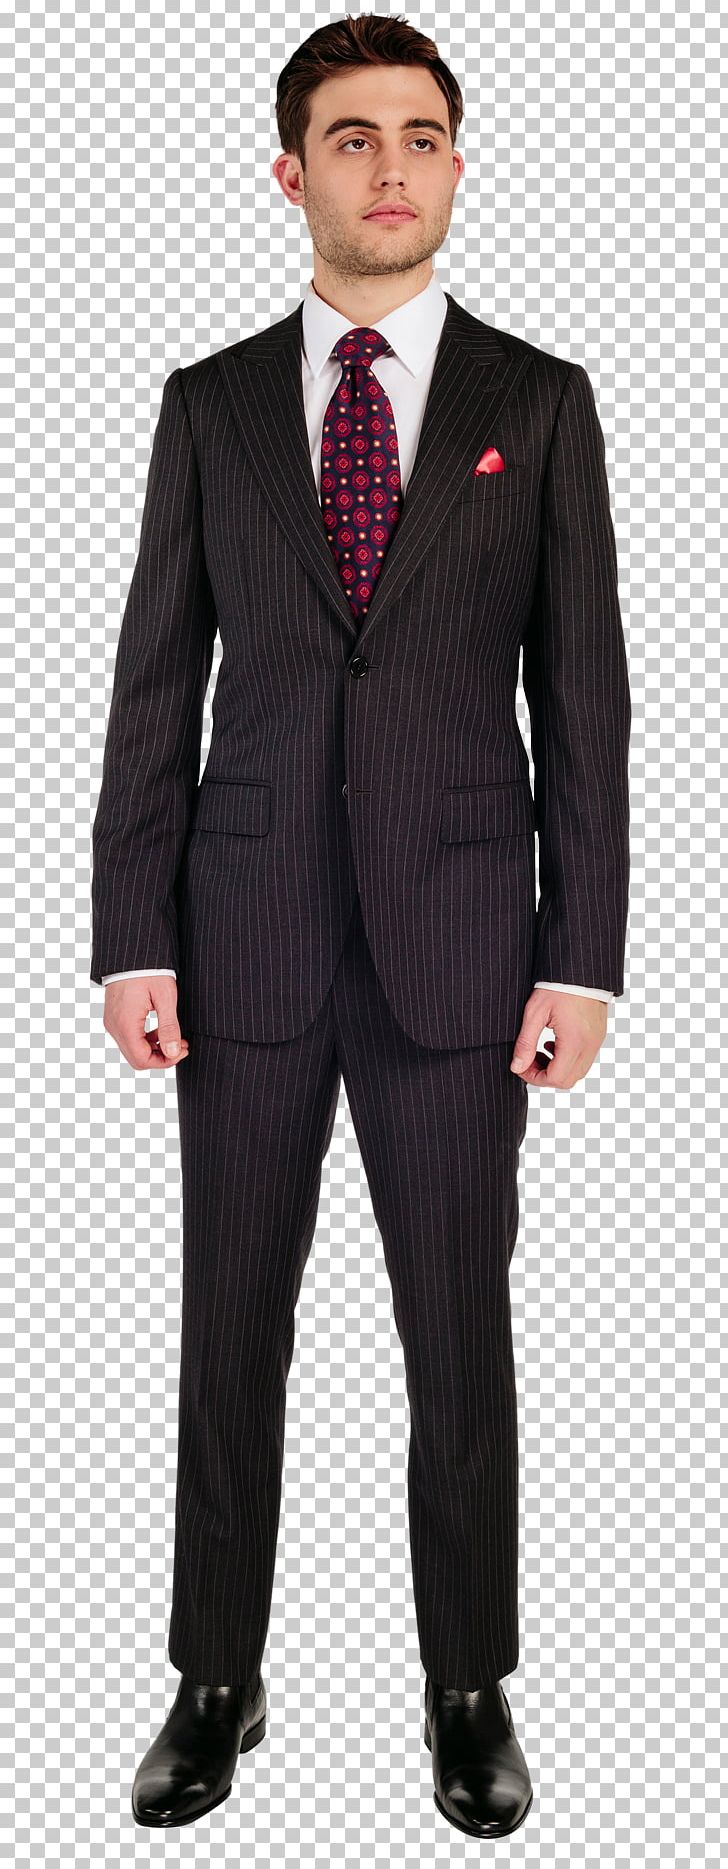 Suit Sport Coat Clothing Tuxedo PNG, Clipart, Attire, Blazer, Business, Business Executive, Businessperson Free PNG Download